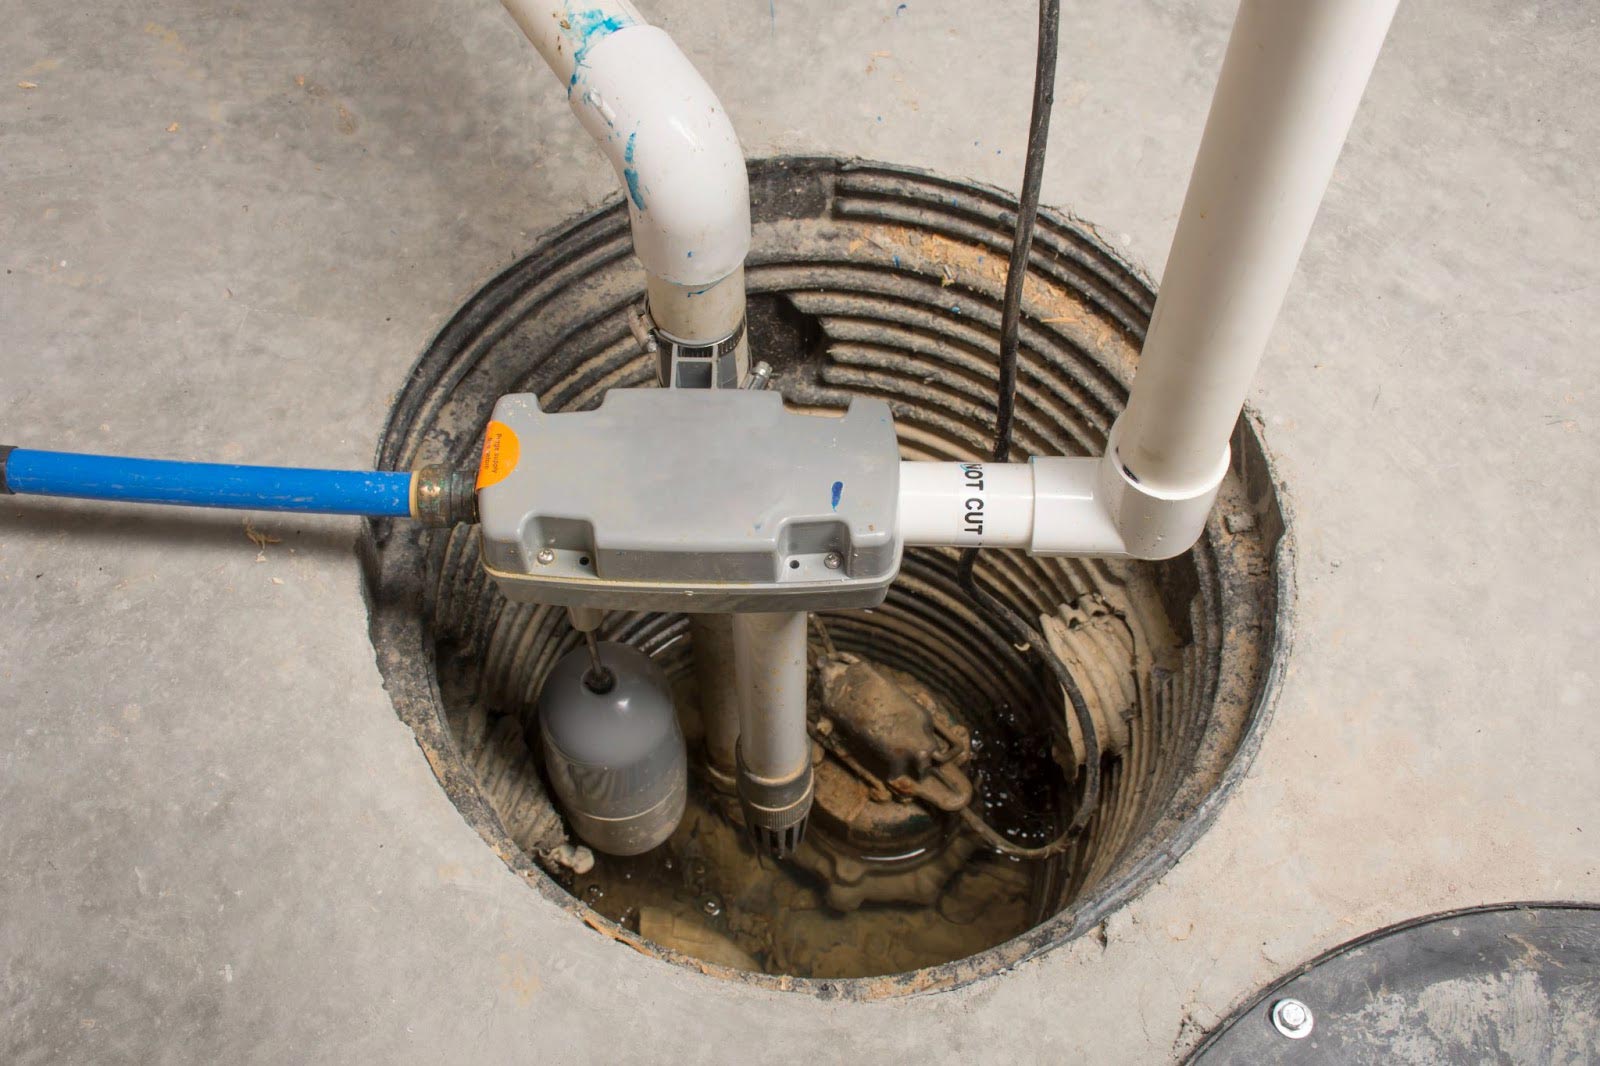 sump pumps work with other drainage components, like floor drains or a drain tile system. In such systems, the pipes from these drains will lead to the sump pump’s sump pit, which is nothing more than a reservoir that holds the water while it waits to be pumped out.